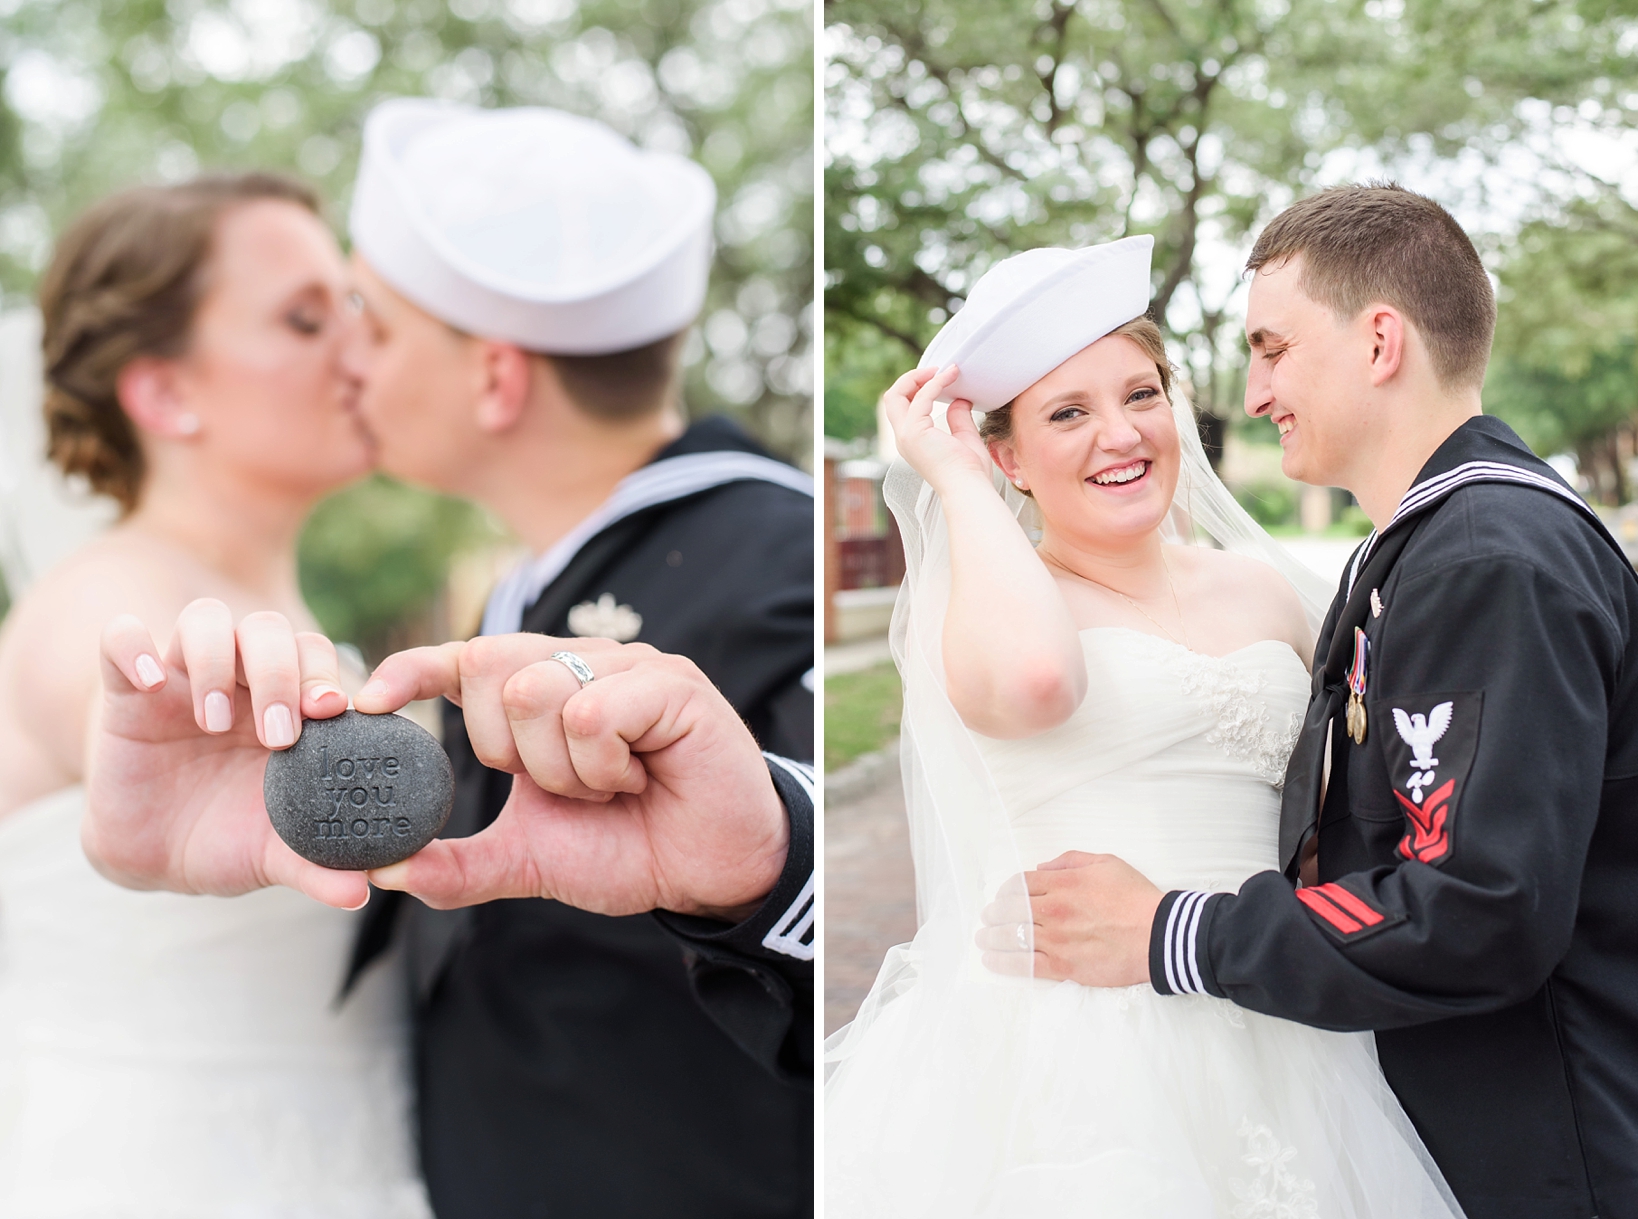 The bride and groom hold out a worry stone for him to rub while he is deployed for the military